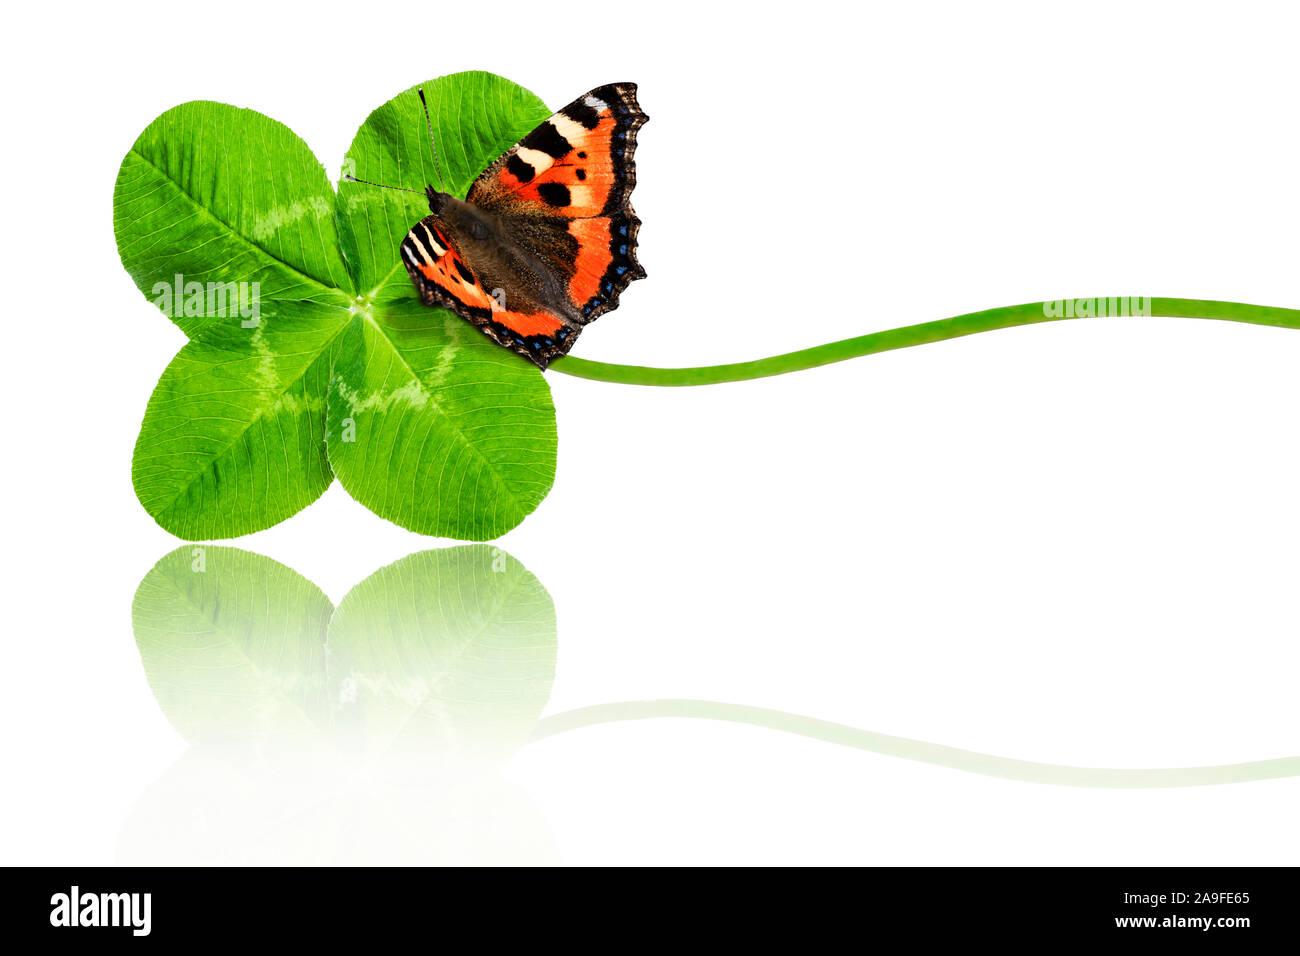 Four-leaf clover with butterfly Stock Photo